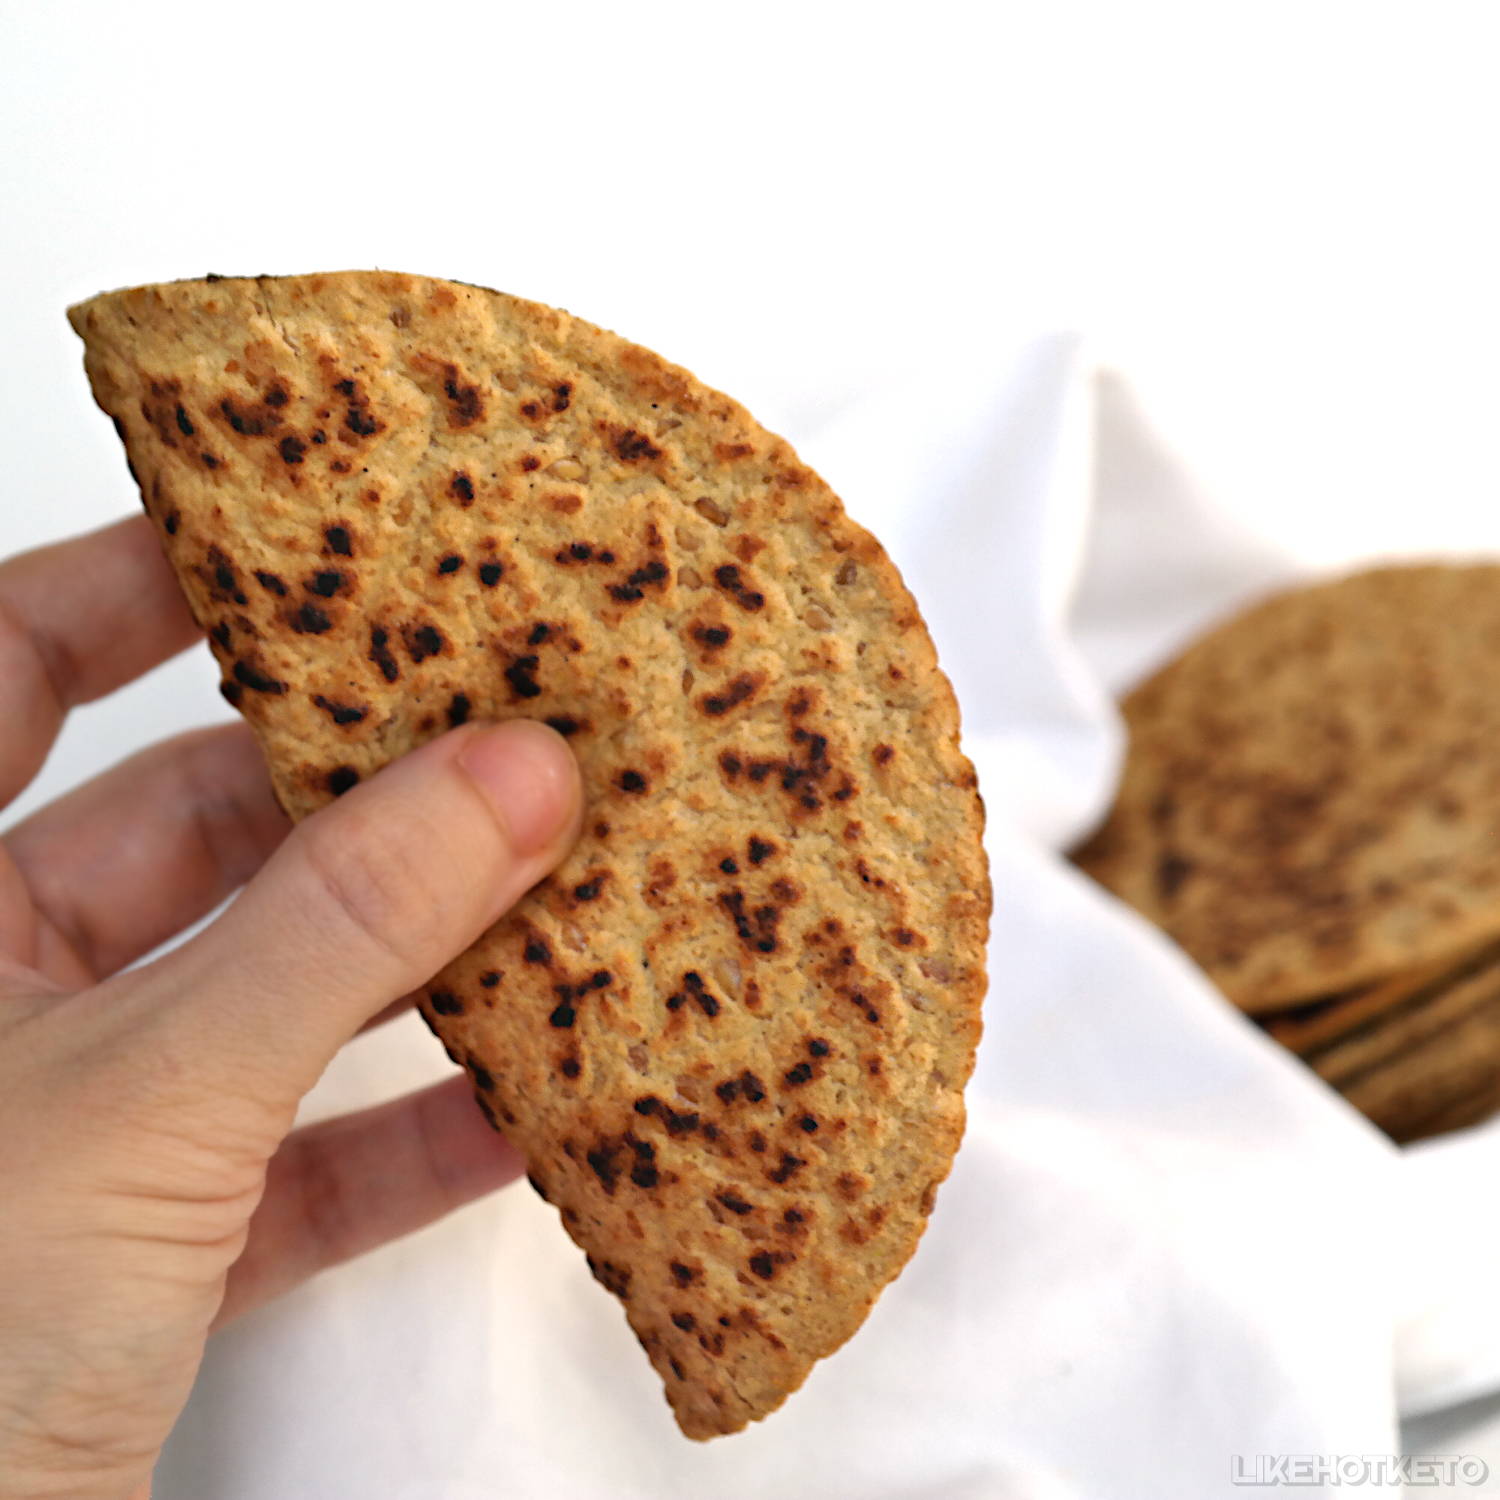 A keto flax meal and pea protein tortilla wrap, folded in between fingers to show  its flexible, soft texture.